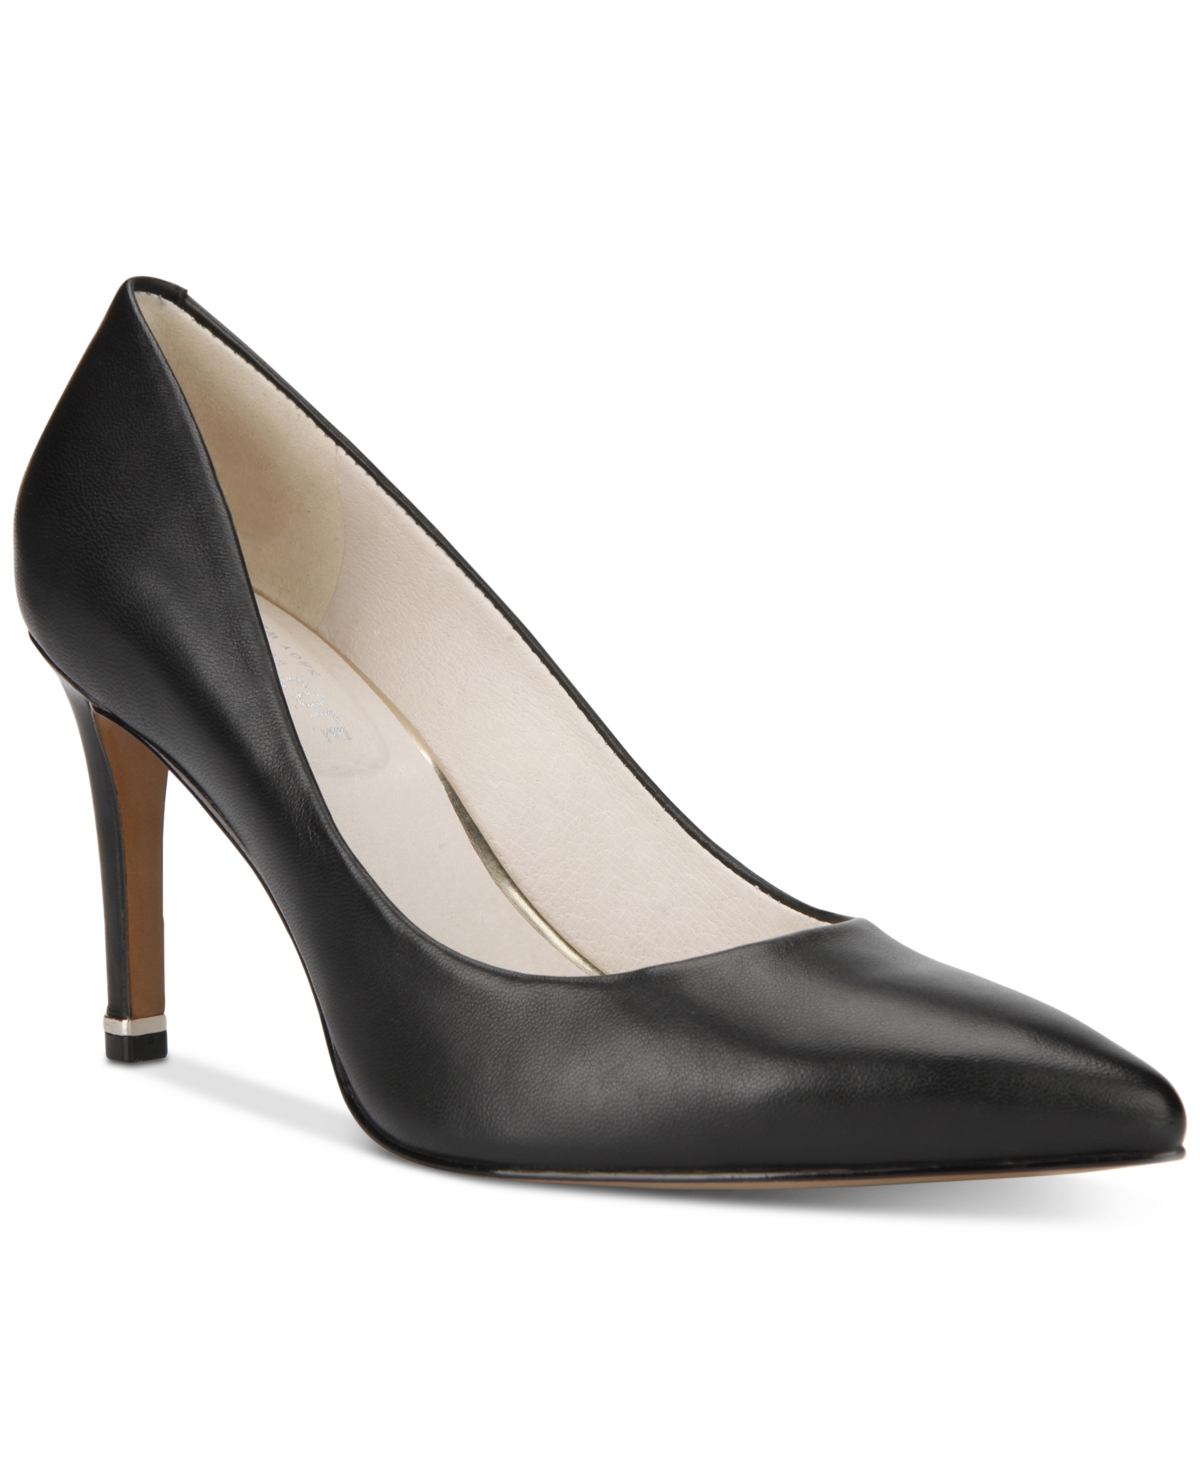 Kenneth Cole New York Women's Riley 85 Pumps Women's Shoes